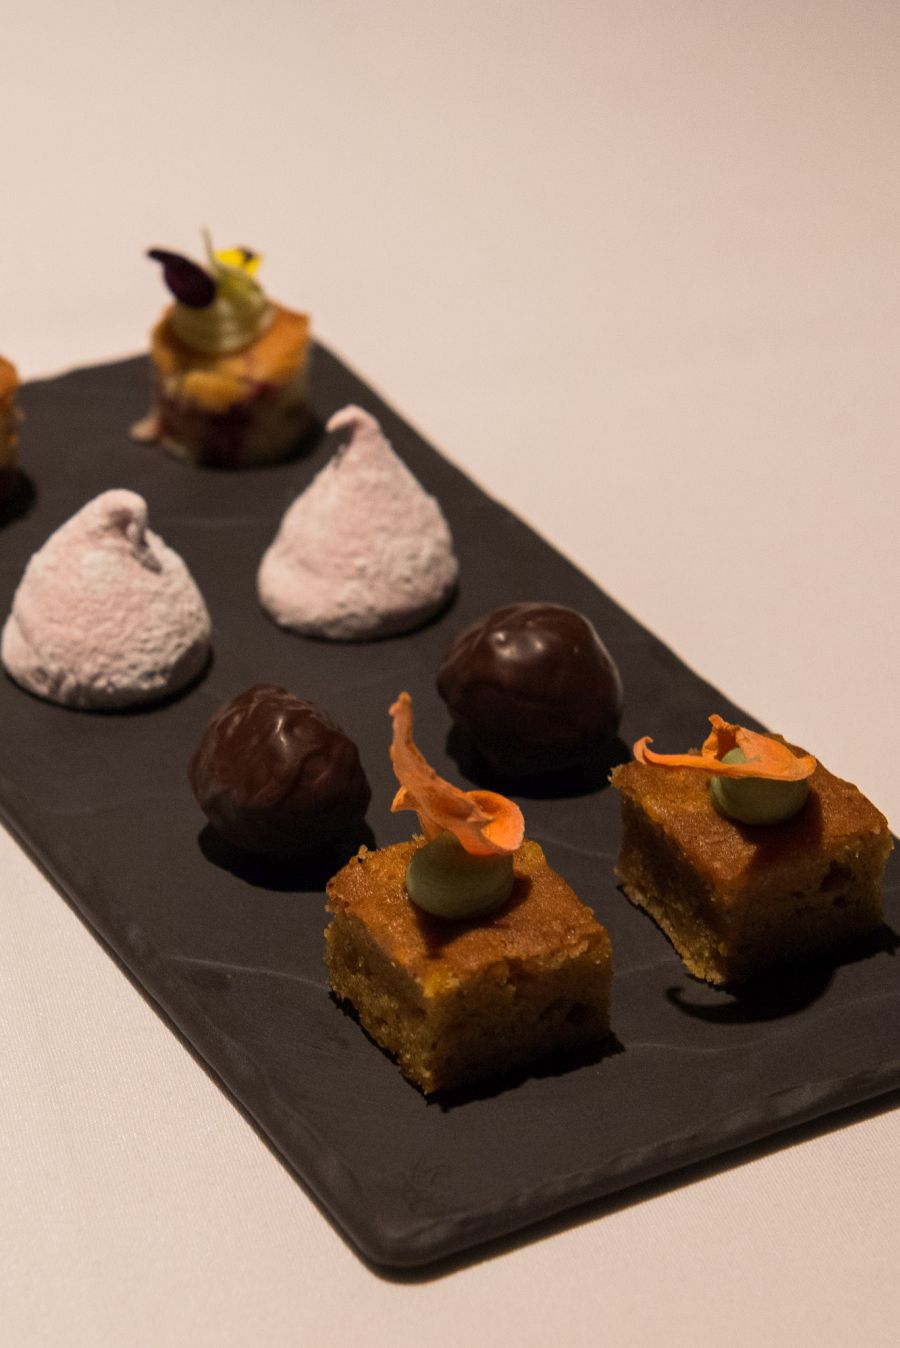 The 'things' served with coffee: carrot cake with dehydrated carrot and green tea ganache; Captain Morgan rum balls, marshmallow and white chocolate and raspberry torte 